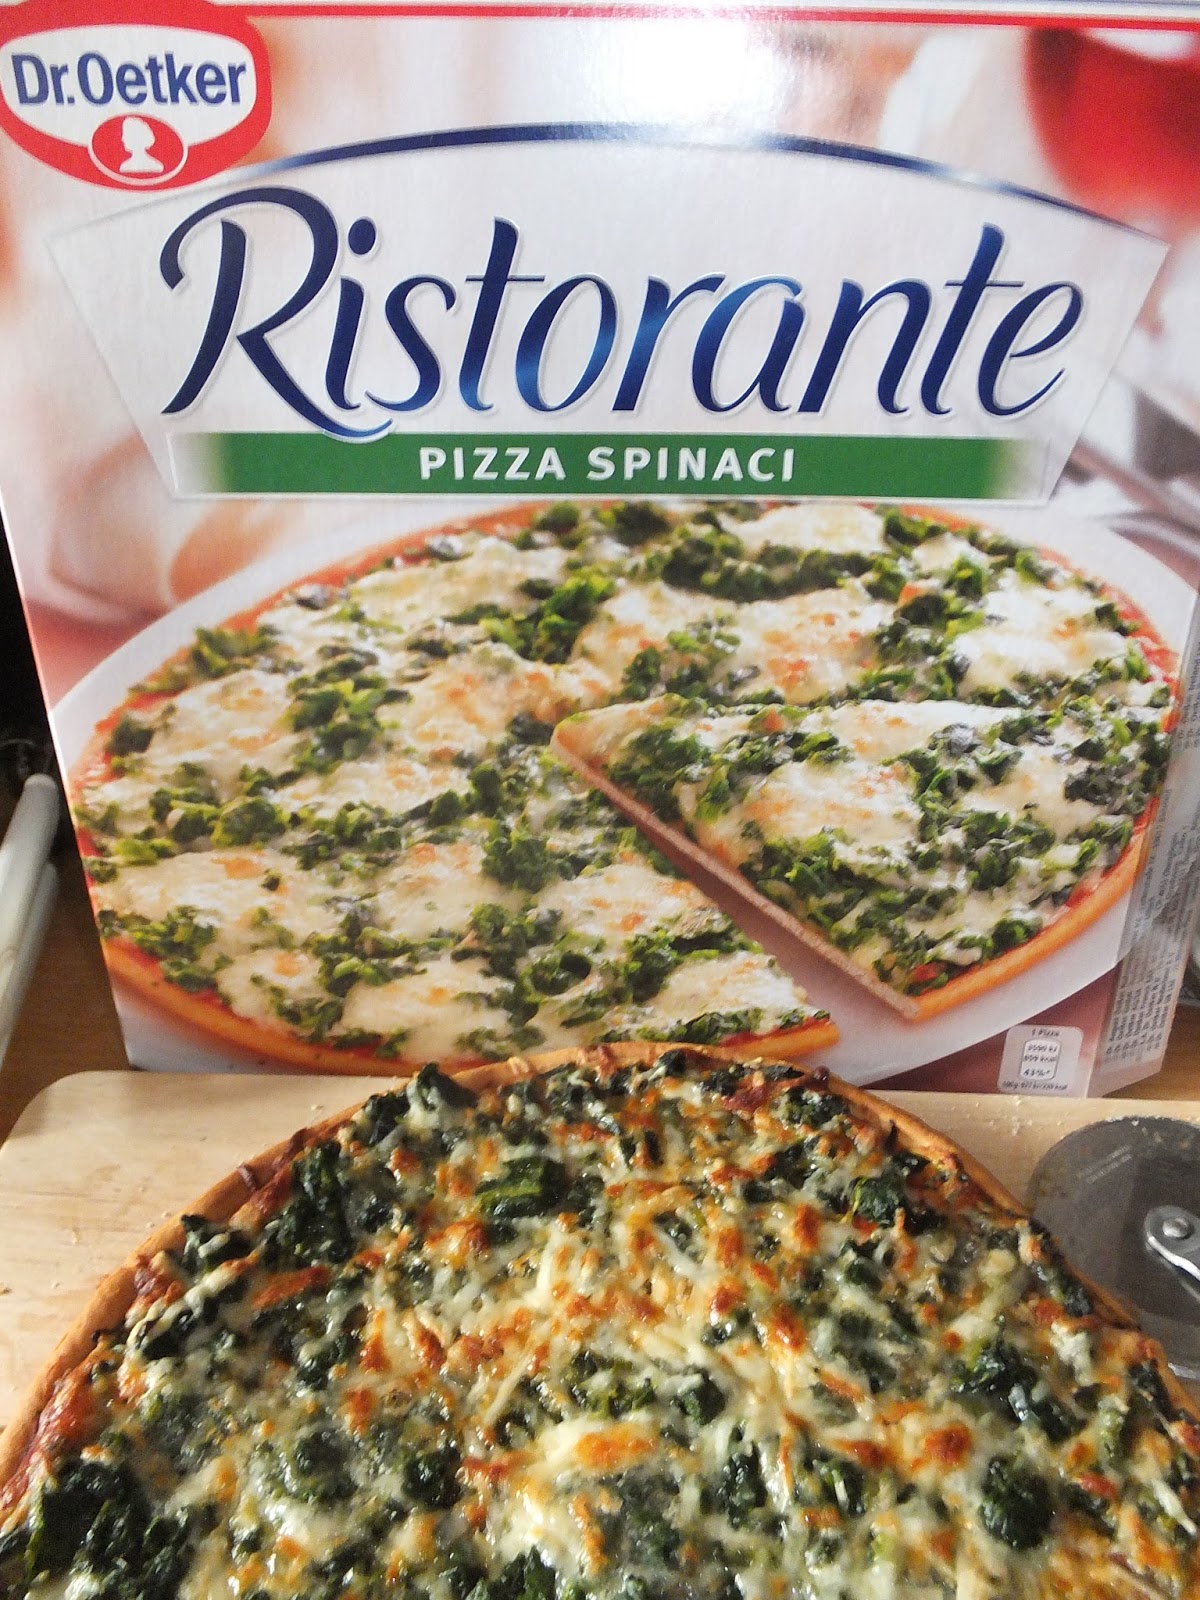 Review: Pizza Spinaci by Dr Oetker Ristorante #SpinaciIsBack